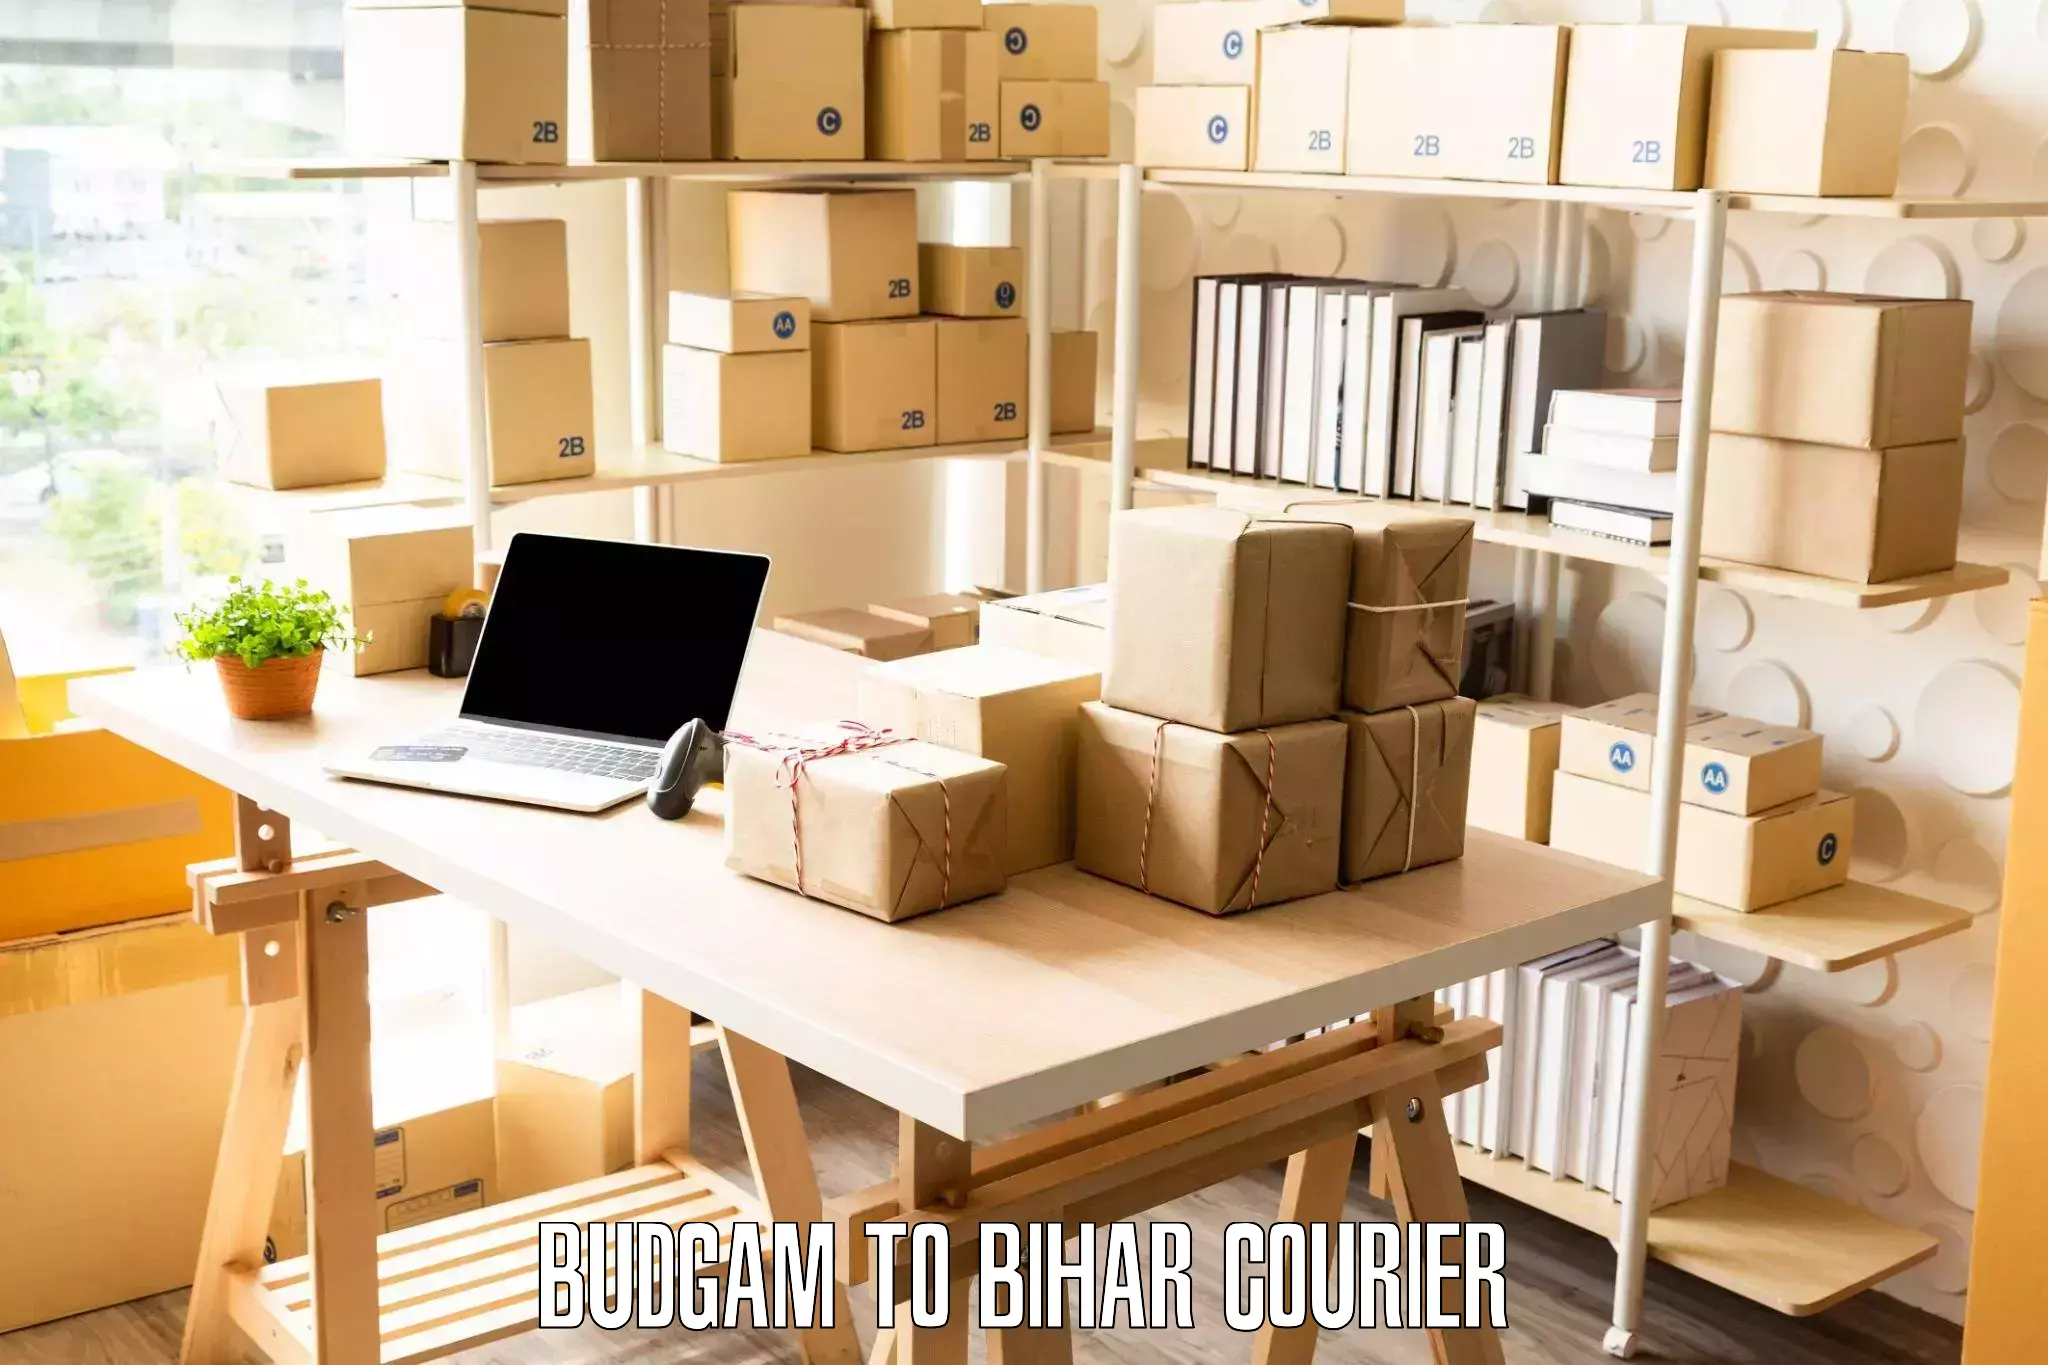 Home moving specialists Budgam to Bihar